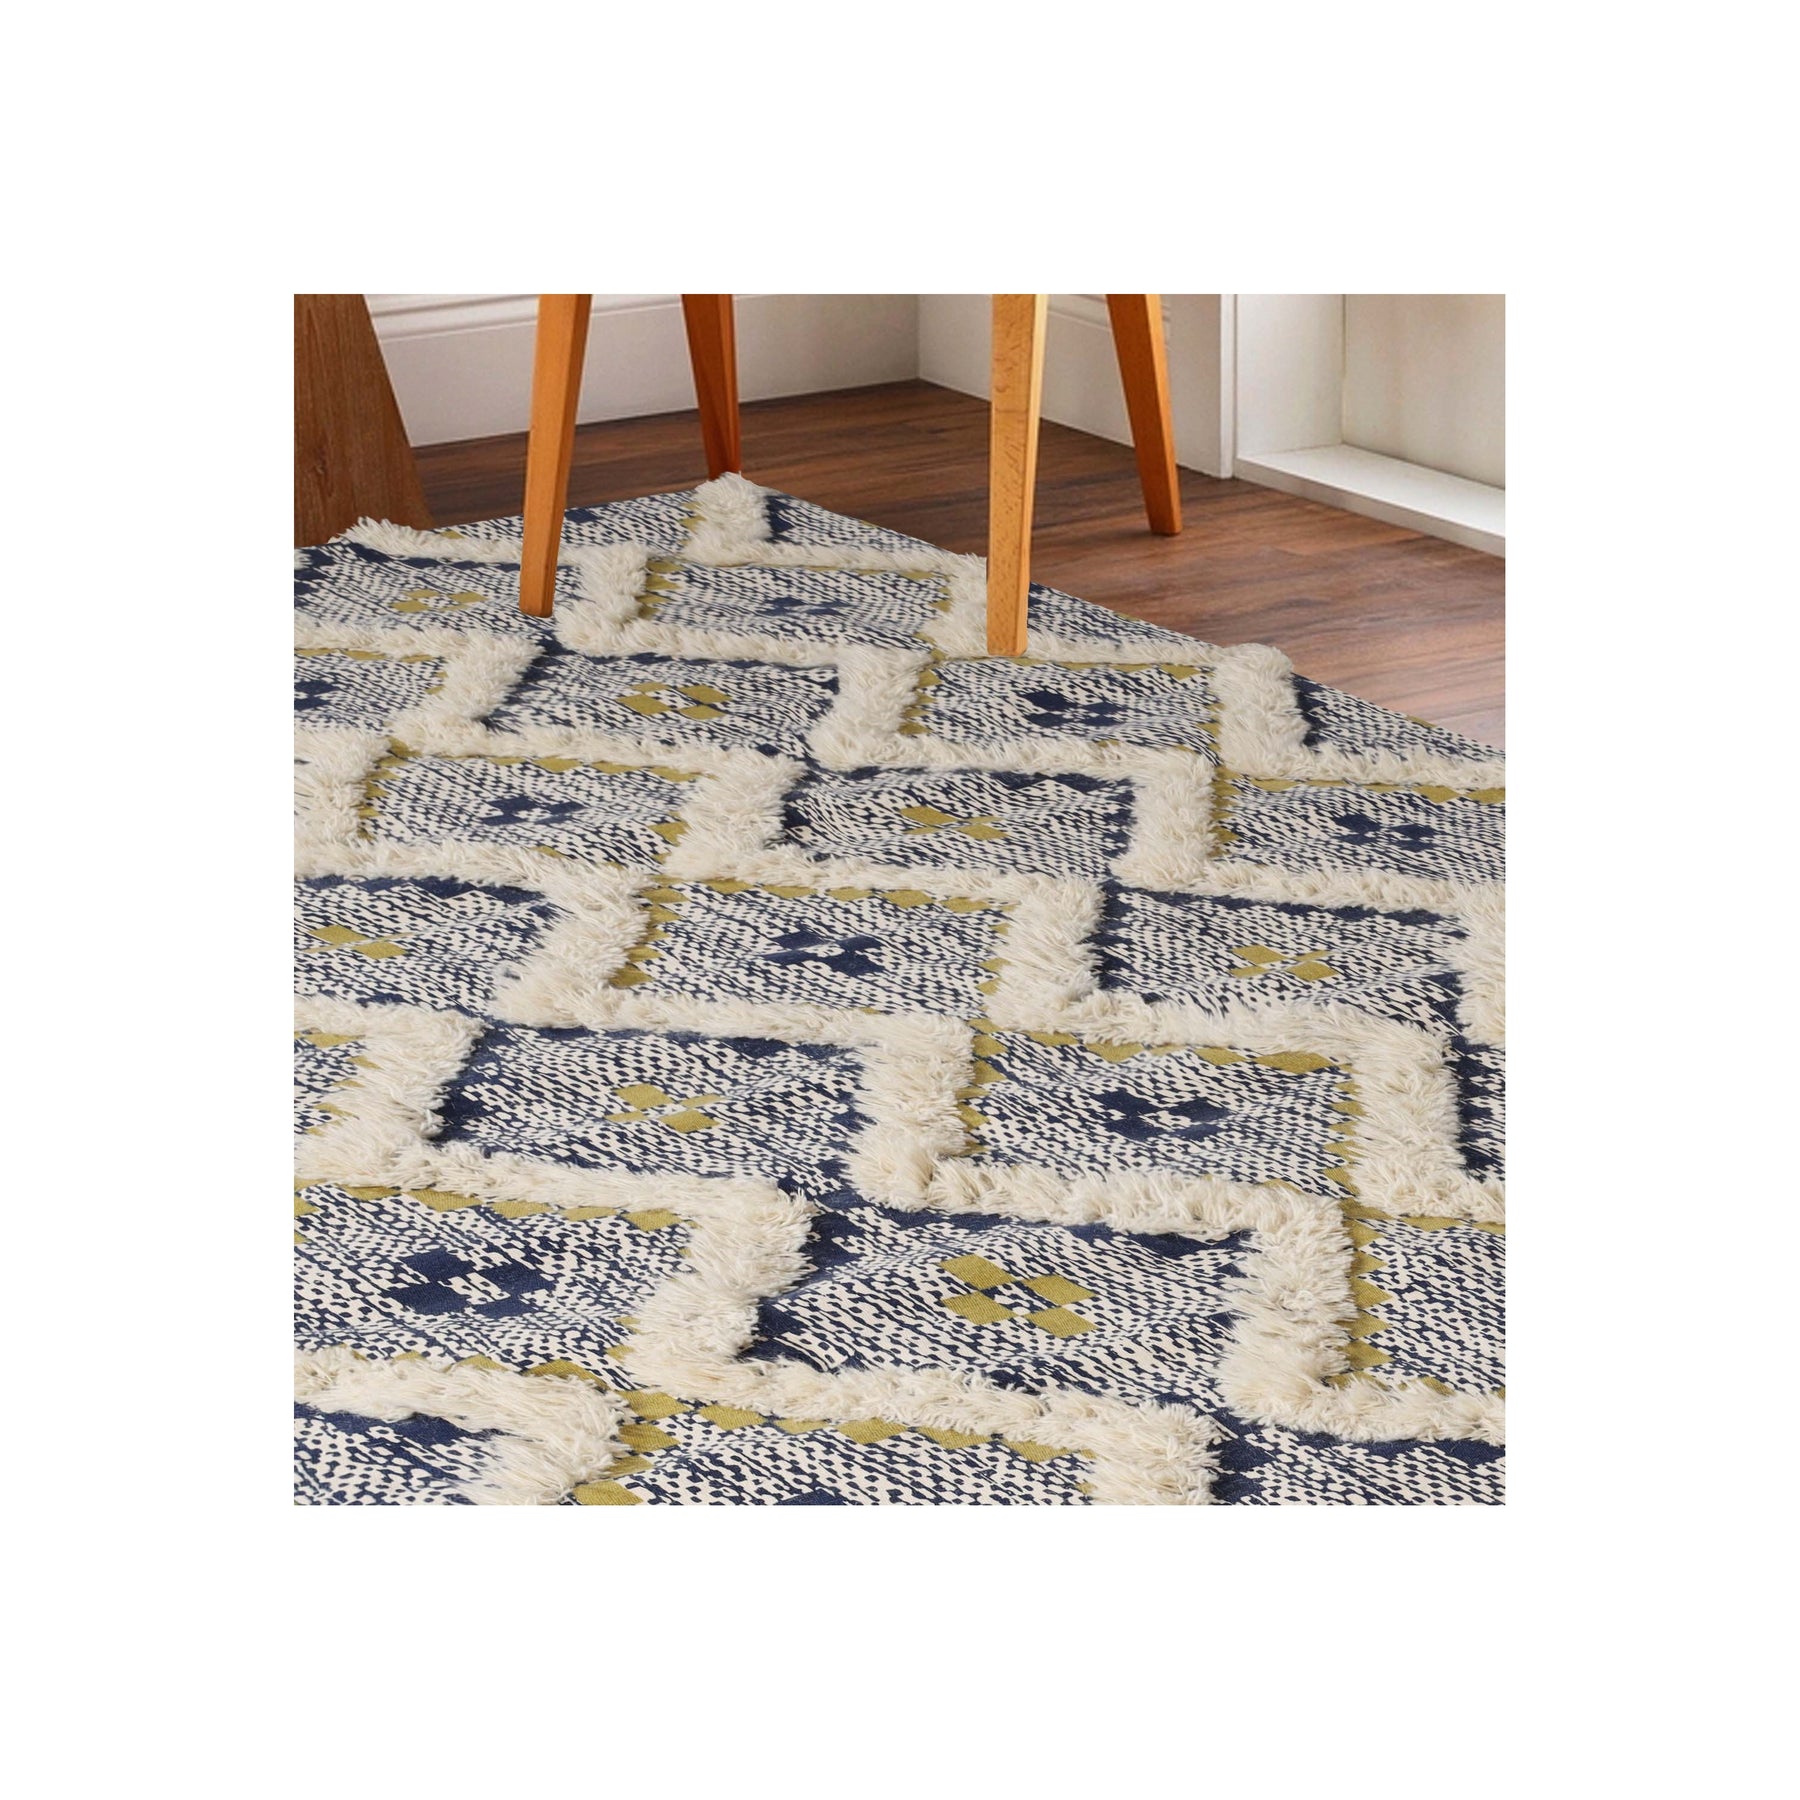 Superior Indoor Area Rug Collection Geometric Design with Cotton-Latex Backing -  Gold- Navy Blue